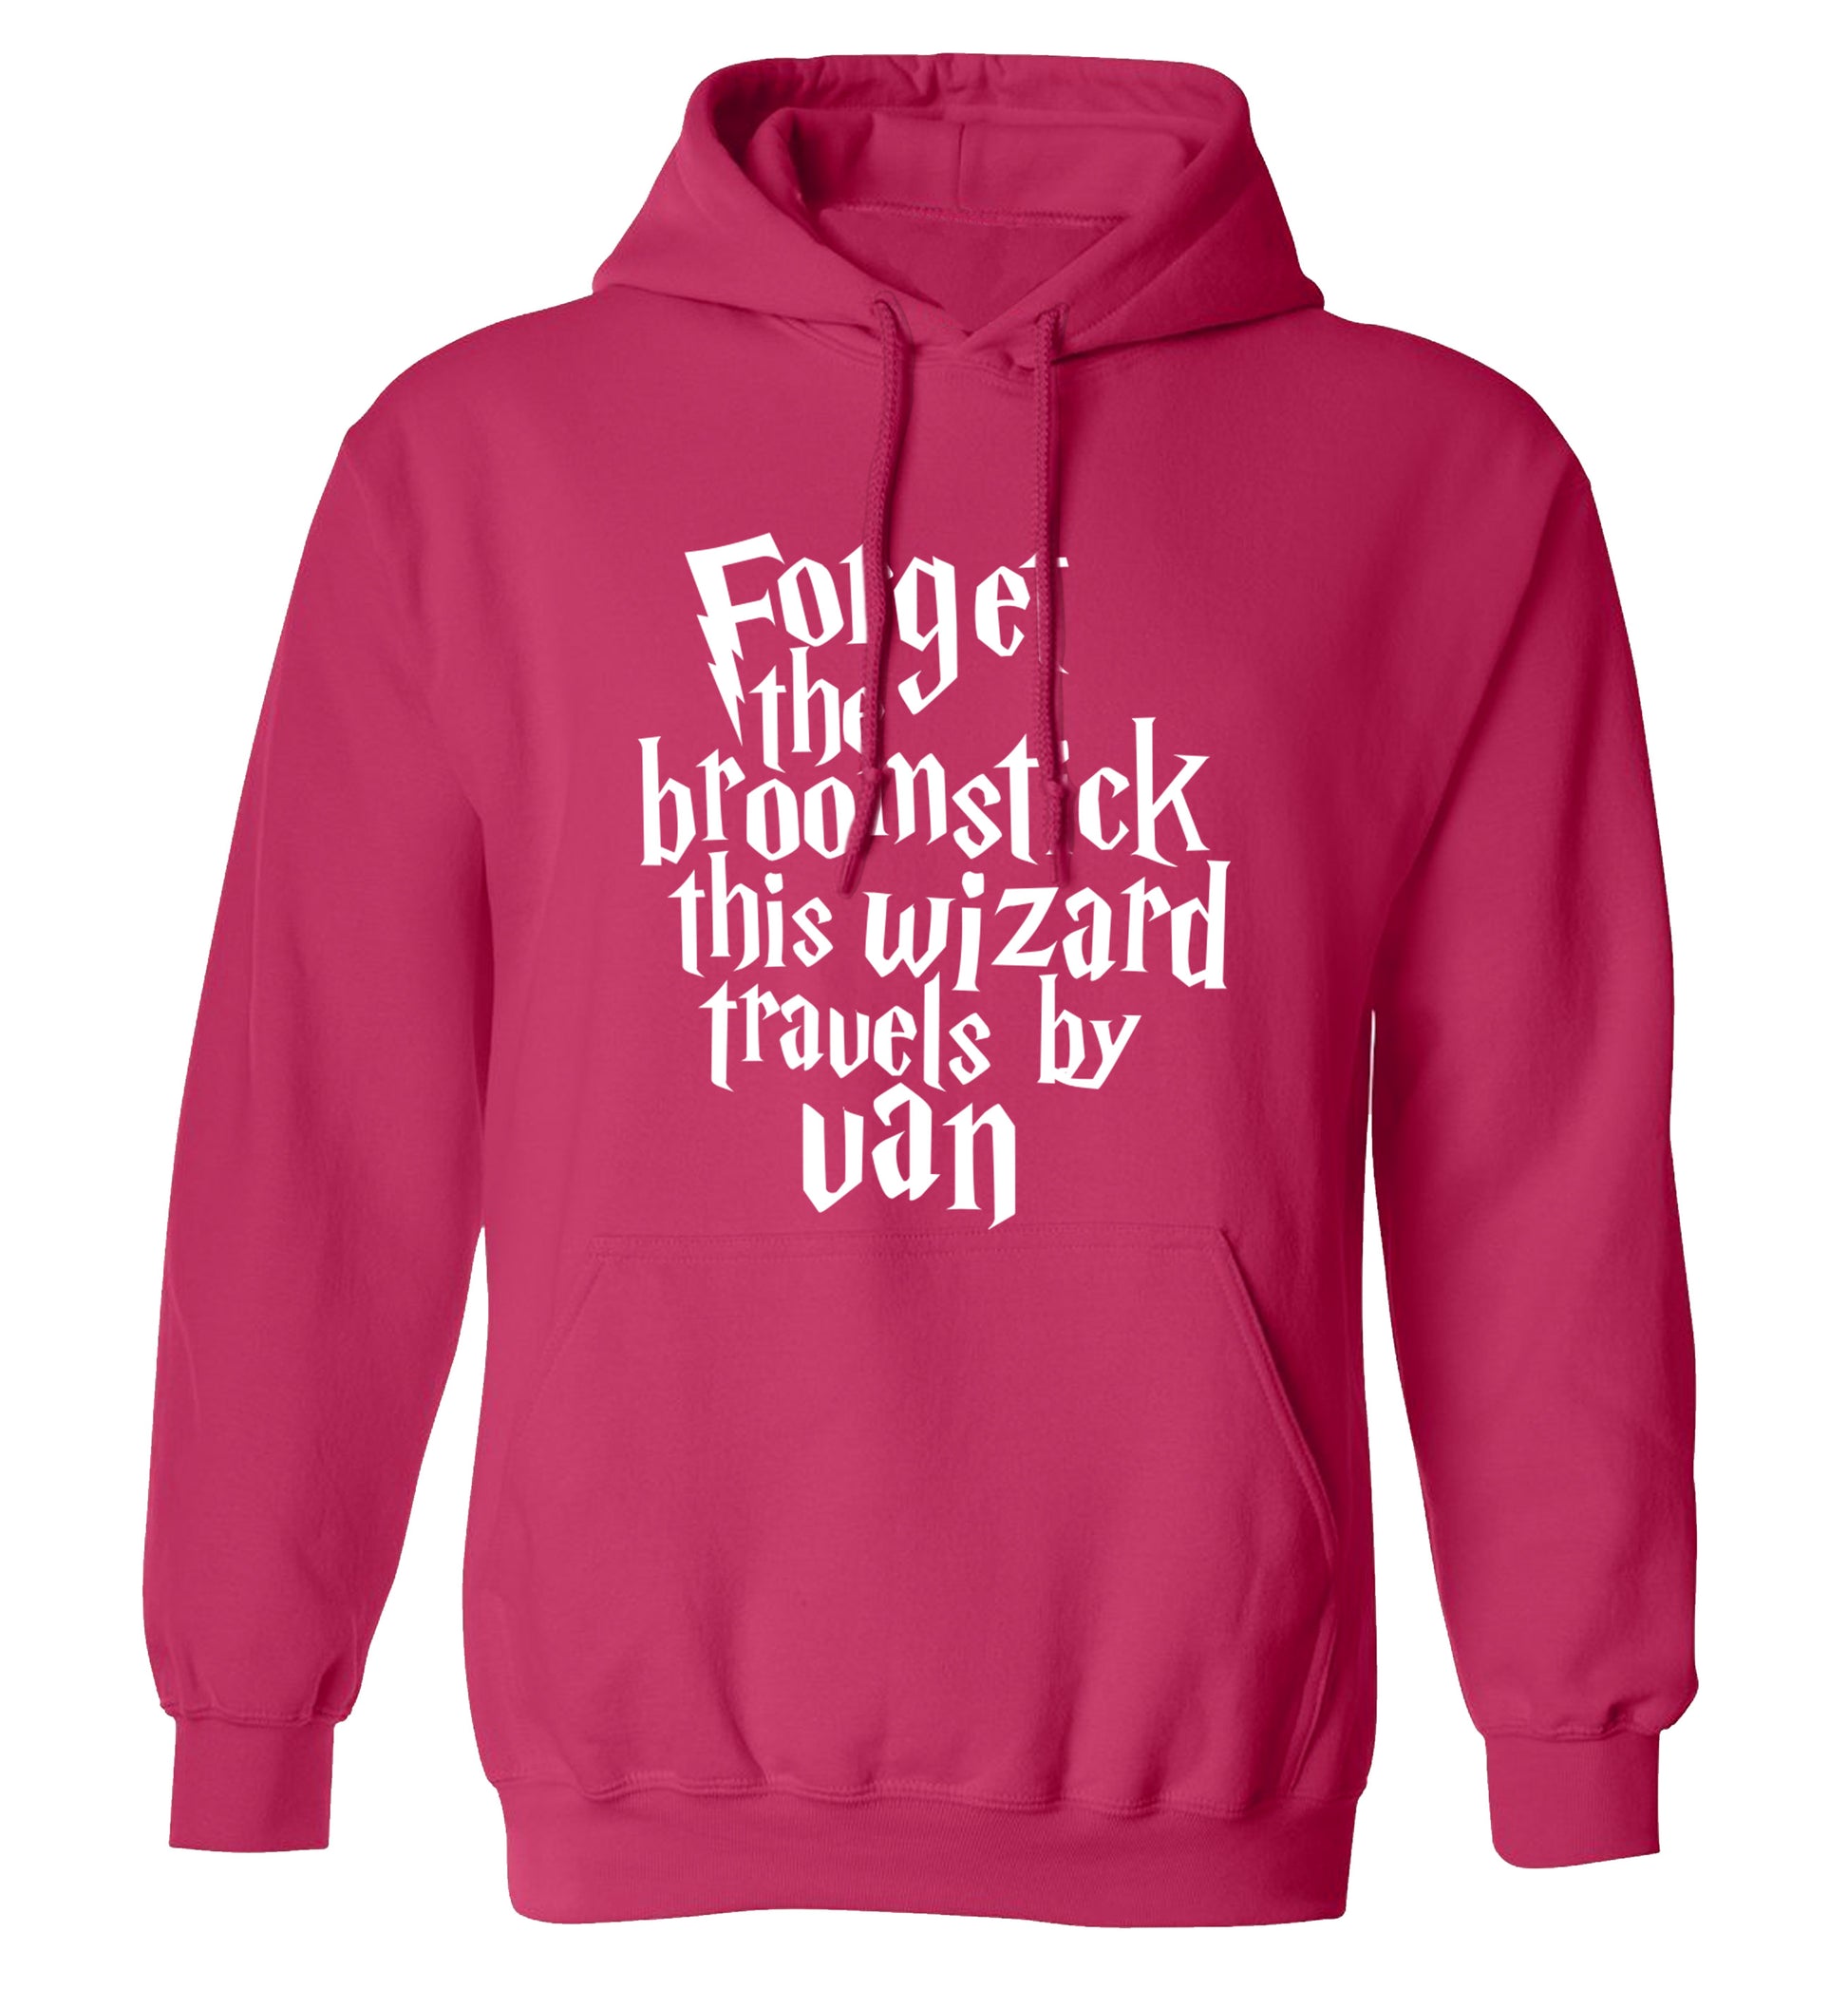 Forget the broomstick this wizard travels by van adults unisexpink hoodie 2XL